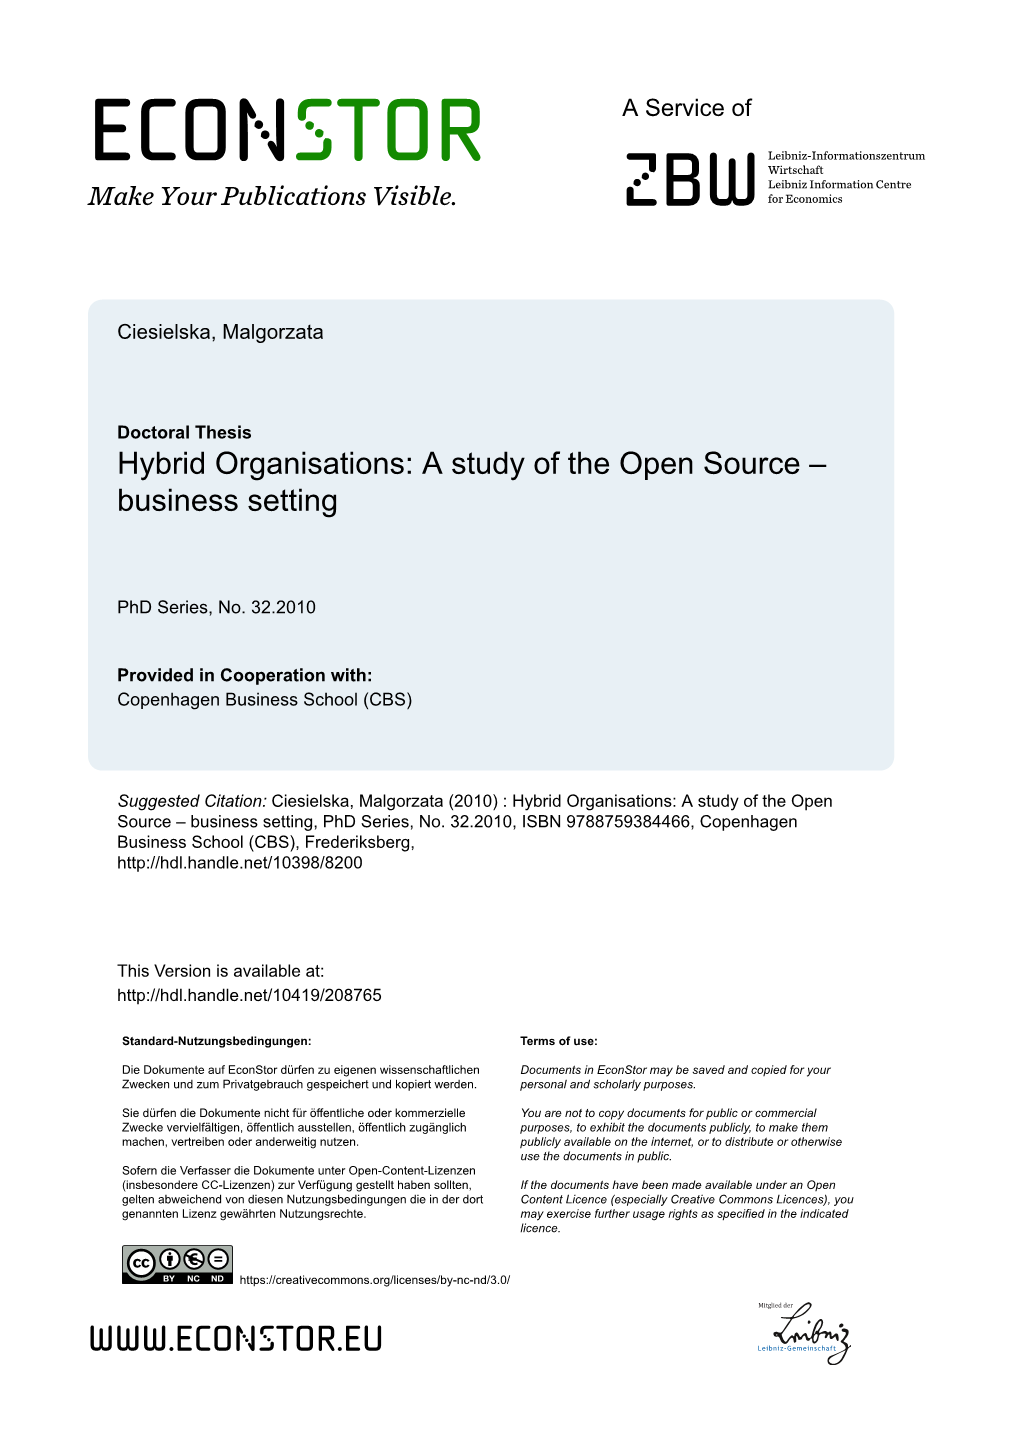 Hybrid Organisations: a Study of the Open Source – Business Setting